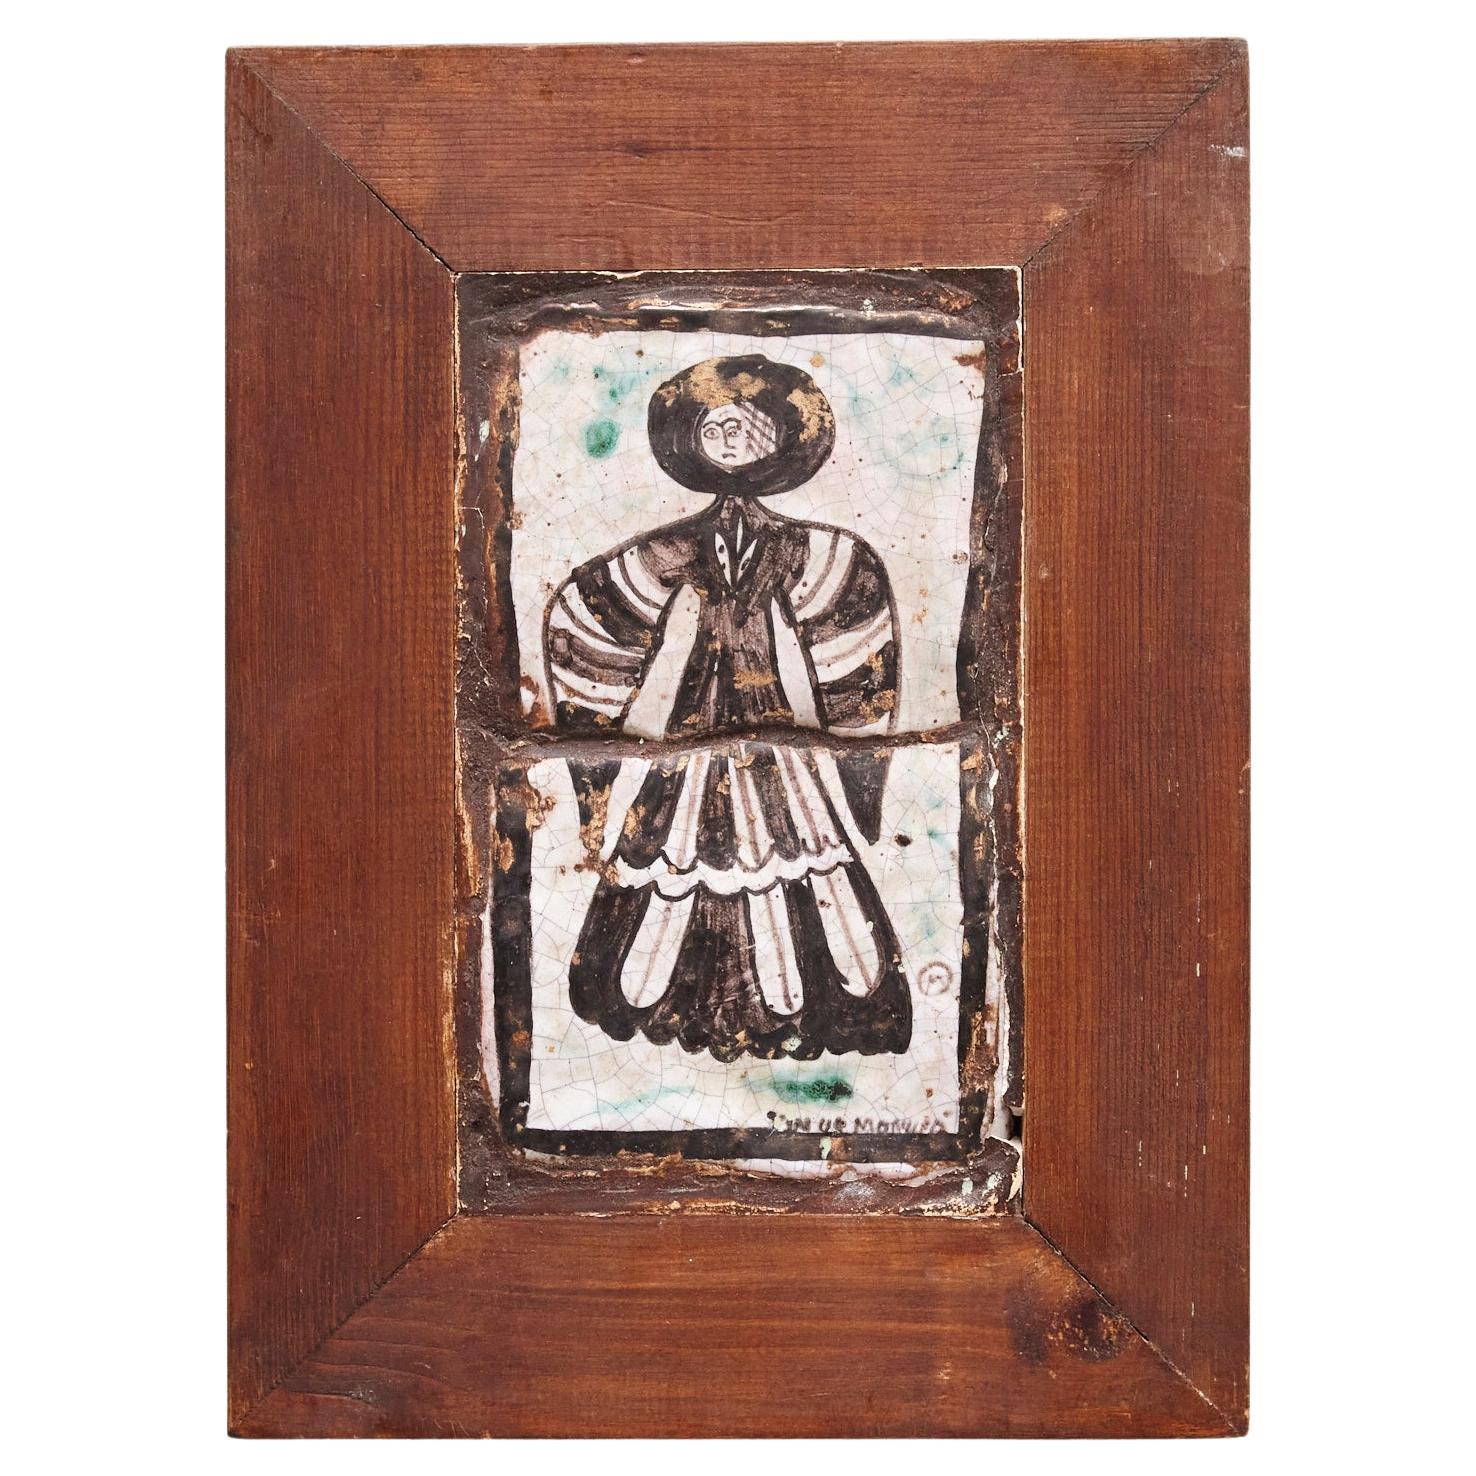 Framed Ceramic Tile Hand Painted Composition, circa 1940